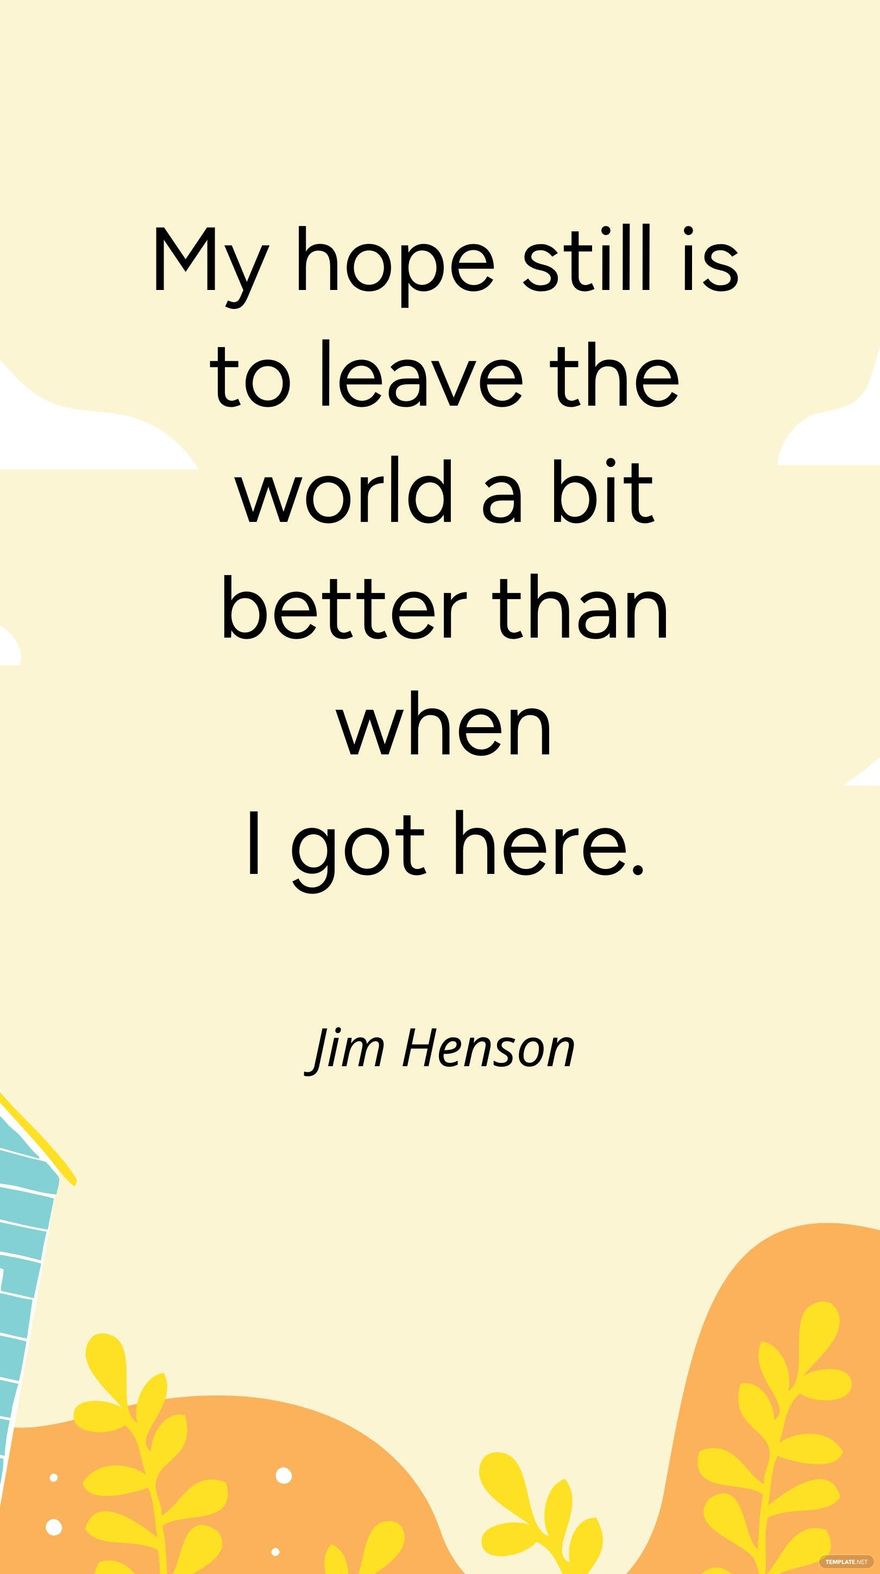 Free Jim Henson - My hope still is to leave the world a bit better than when I got here.